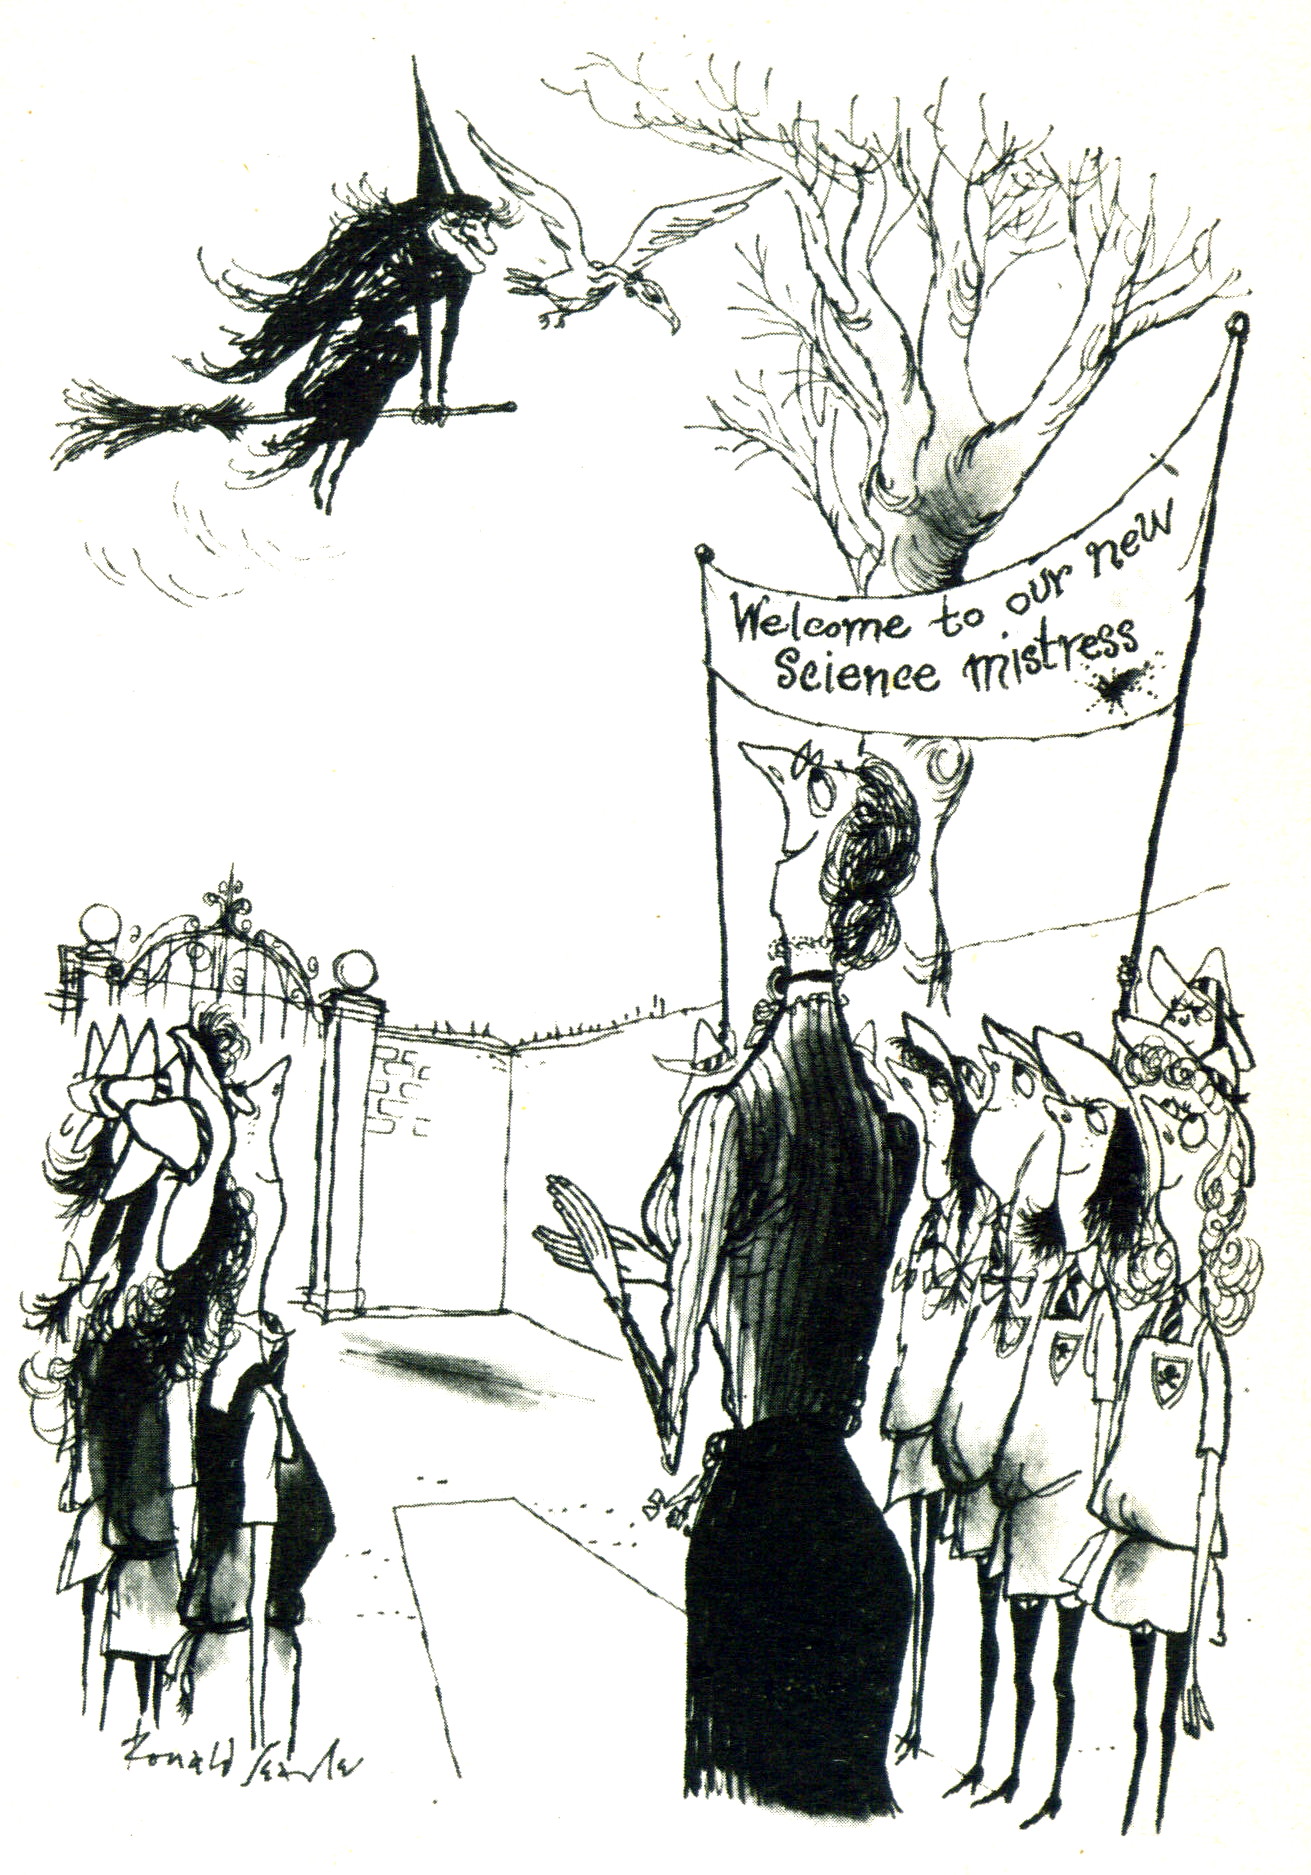 cartoon of a witch on a broomstick, accompanied by a pet albatross, being greeted by a committe of a female teacher and several schoolgirls holding a banner which reads \'Welcome to our new Science Mistress\'